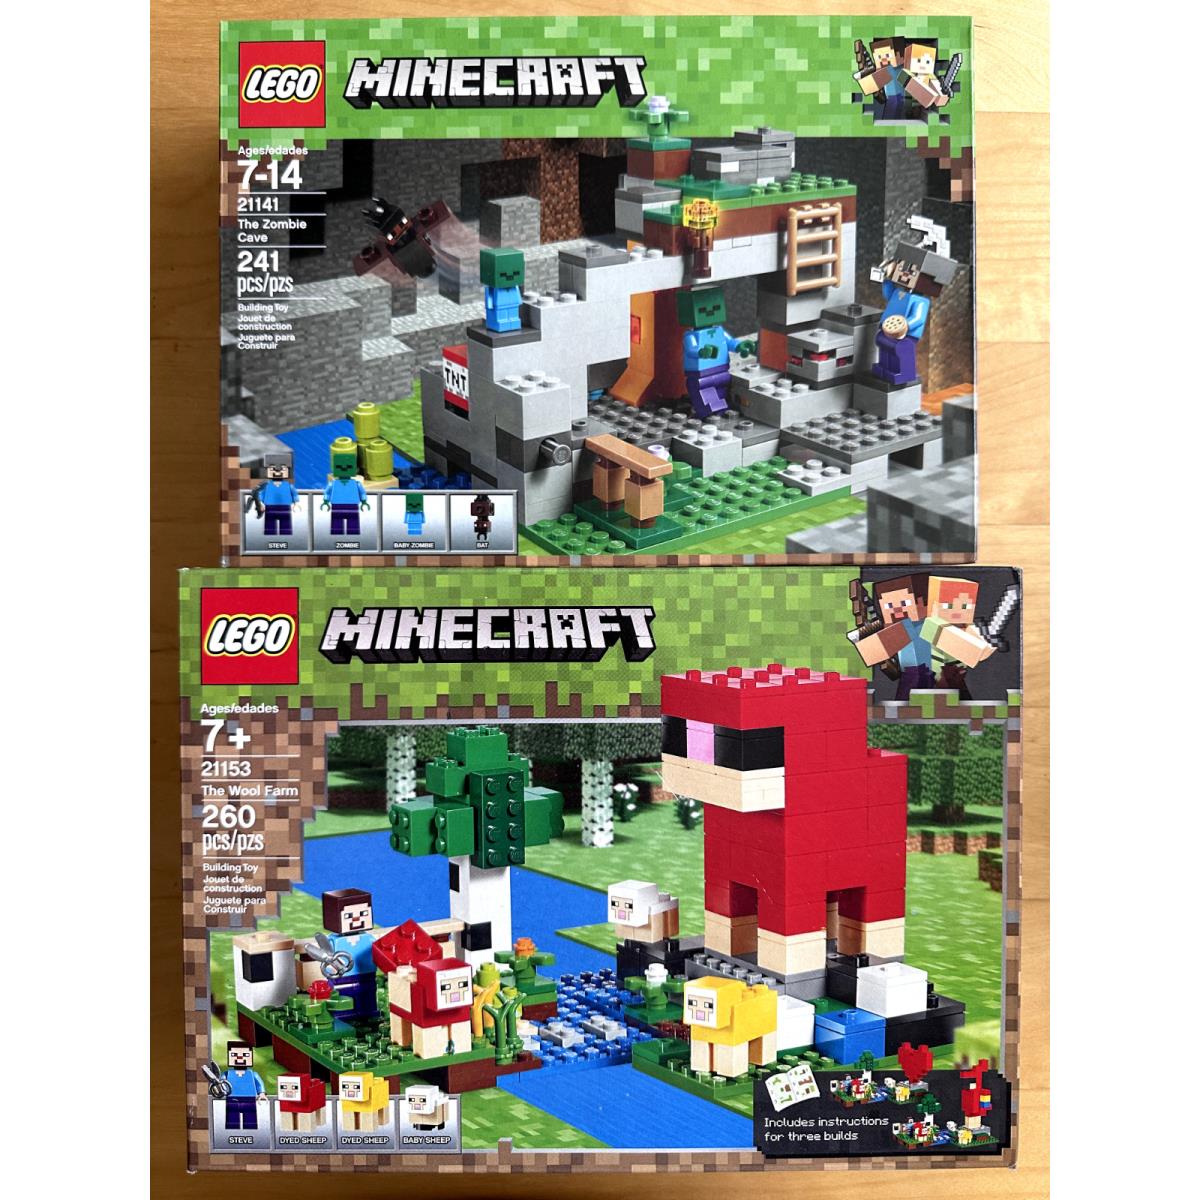 Lego Minecraft 2 Sets 21141 The Zombie Cave 21153 The Wool Farm Nisb